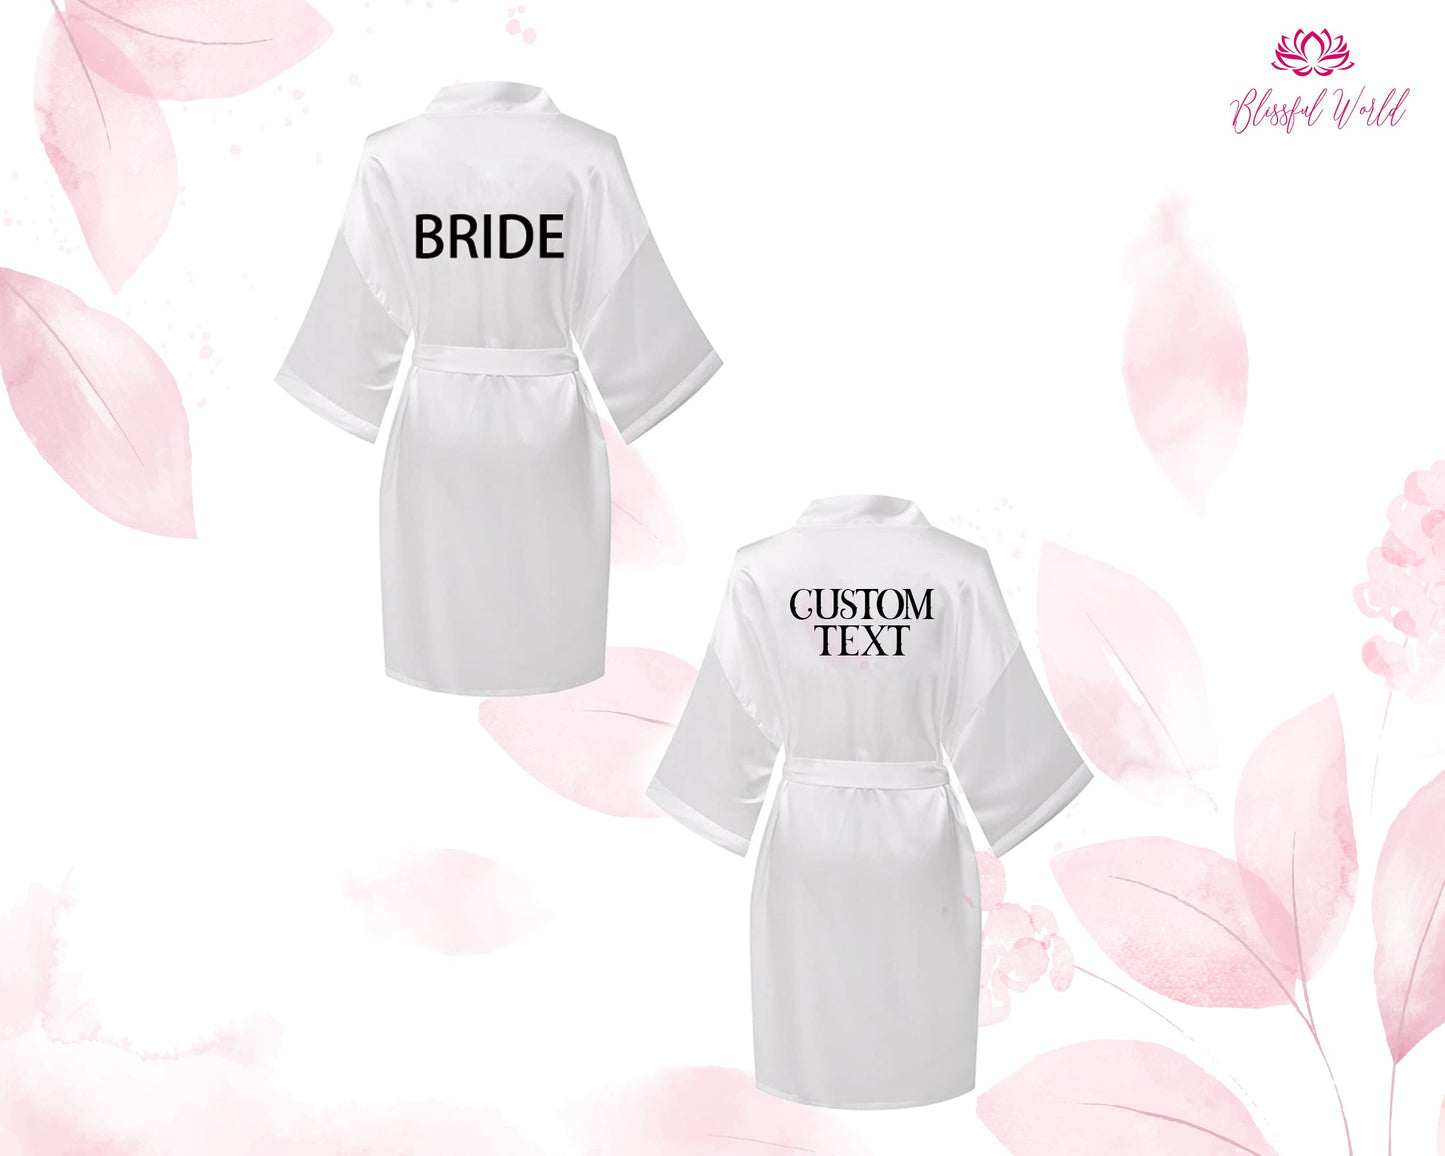 Groom and Bride Satin Robes, Customized Wedding robes, Personalized robes, Anniversary gift, Honeymoon gift, Custom Satin gown,